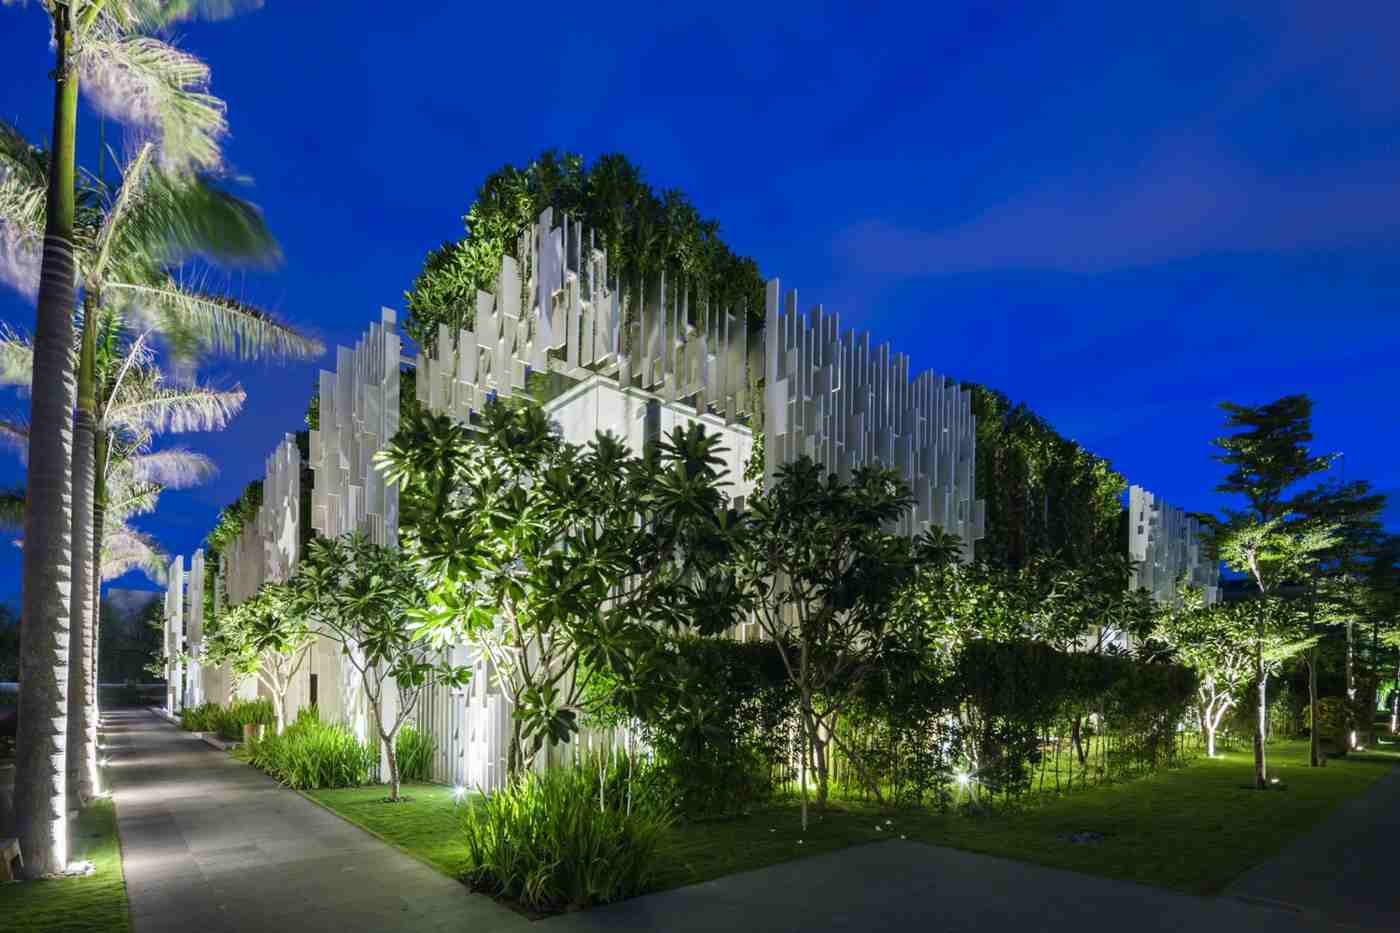 The green facade of night with effective lighting